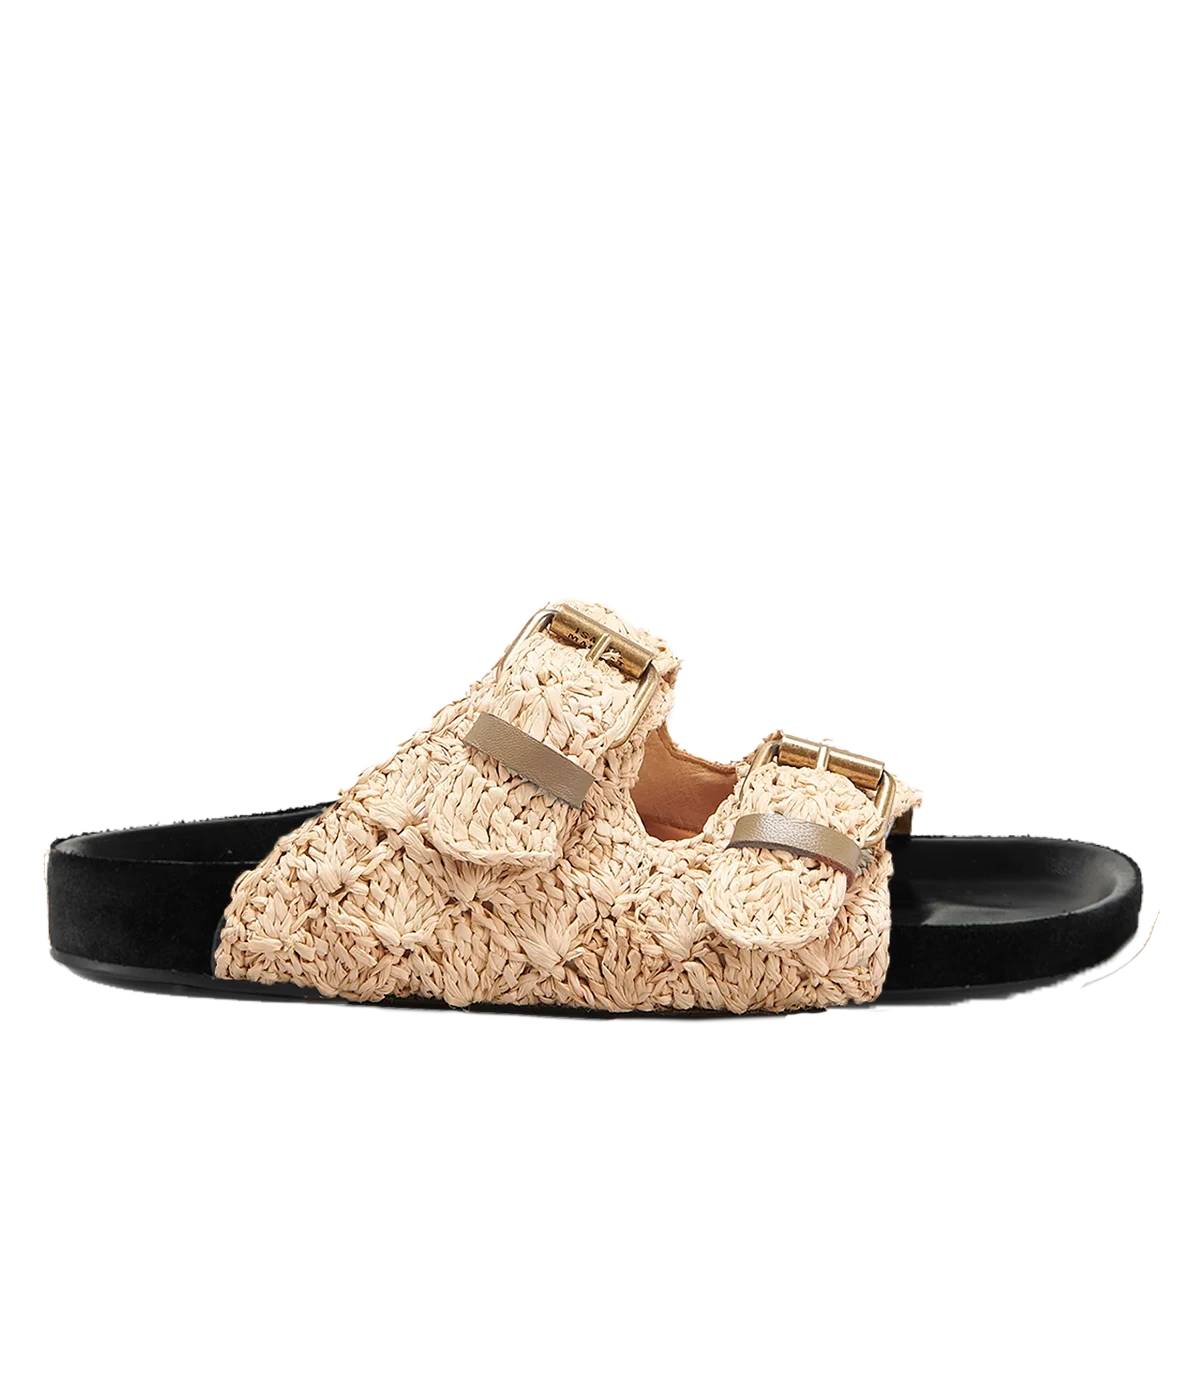 Isabel Marant’s iconic Lennyo Sandal in raffia and leather, with a contrasting black sole. The perfect slip on Birkenstock style shoe to wear all summer, with a moulded footbed for comfort. 